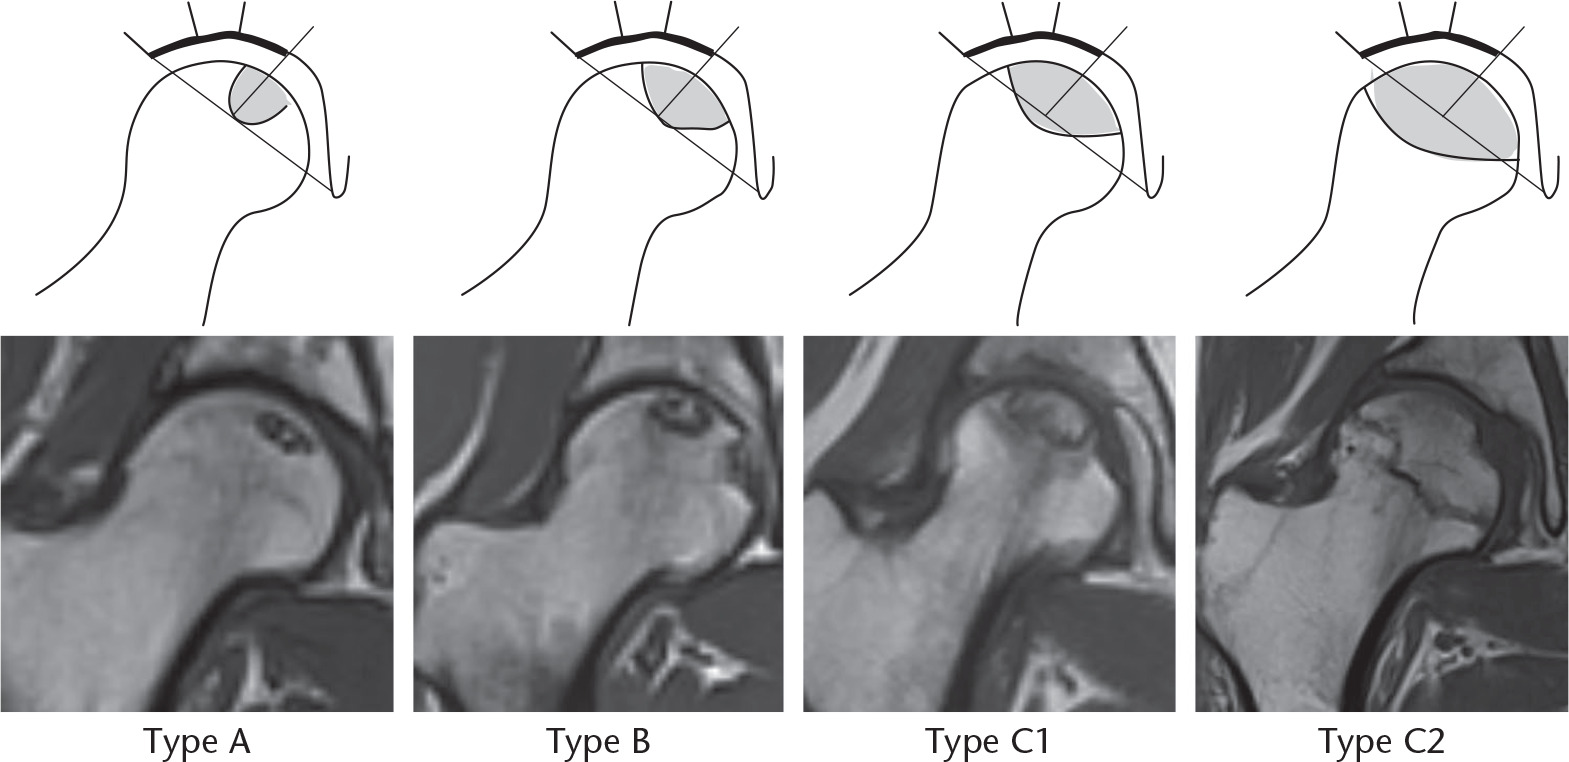 Fig. 1 
          Schematic representation of T1-weighted MRIs of the 2001 revised Japanese Investigation Committee classification system20 based on type. The classification schema comprises four types (A, B, C1, and C2). Type A involves the smallest osteonecrotic lesions of the four types (present only in the medial one-third, or less, of the weightbearing surface). Type B involves osteonecrotic lesions present in the medial two-thirds, or less, of the weightbearing surface. Type C1 lesions are characterized by an osteonecrotic zone that spans more than the medial two-thirds of the weightbearing surface at the acetabular edge. Type C2 involves the largest osteonecrotic zone that spans more than the medial two-thirds of the weightbearing surface and exceeds the acetabular edge.
        